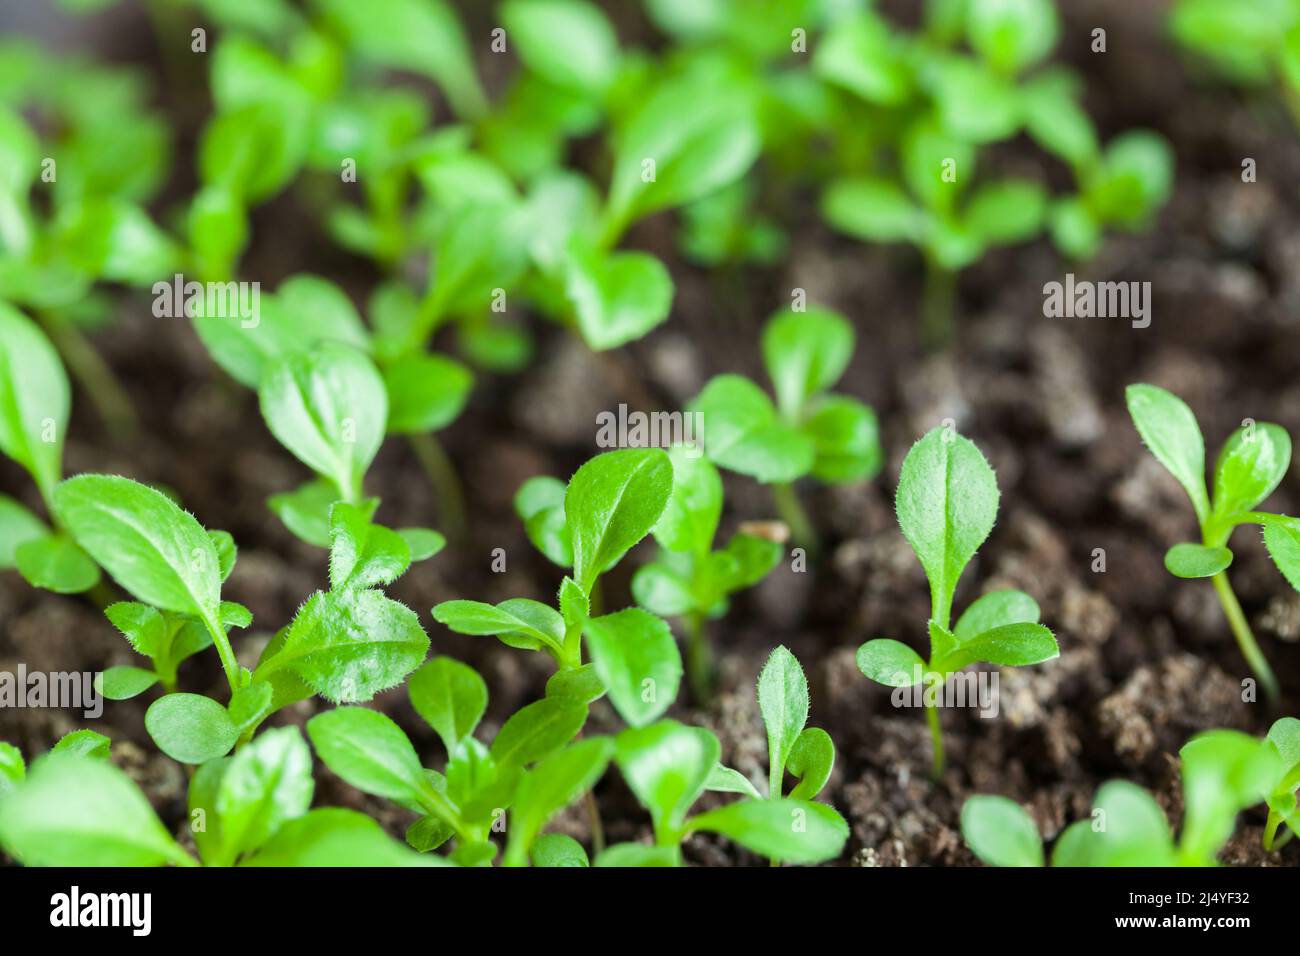 Small green plant seedlings grow in dark soil, close up photo Stock Photo